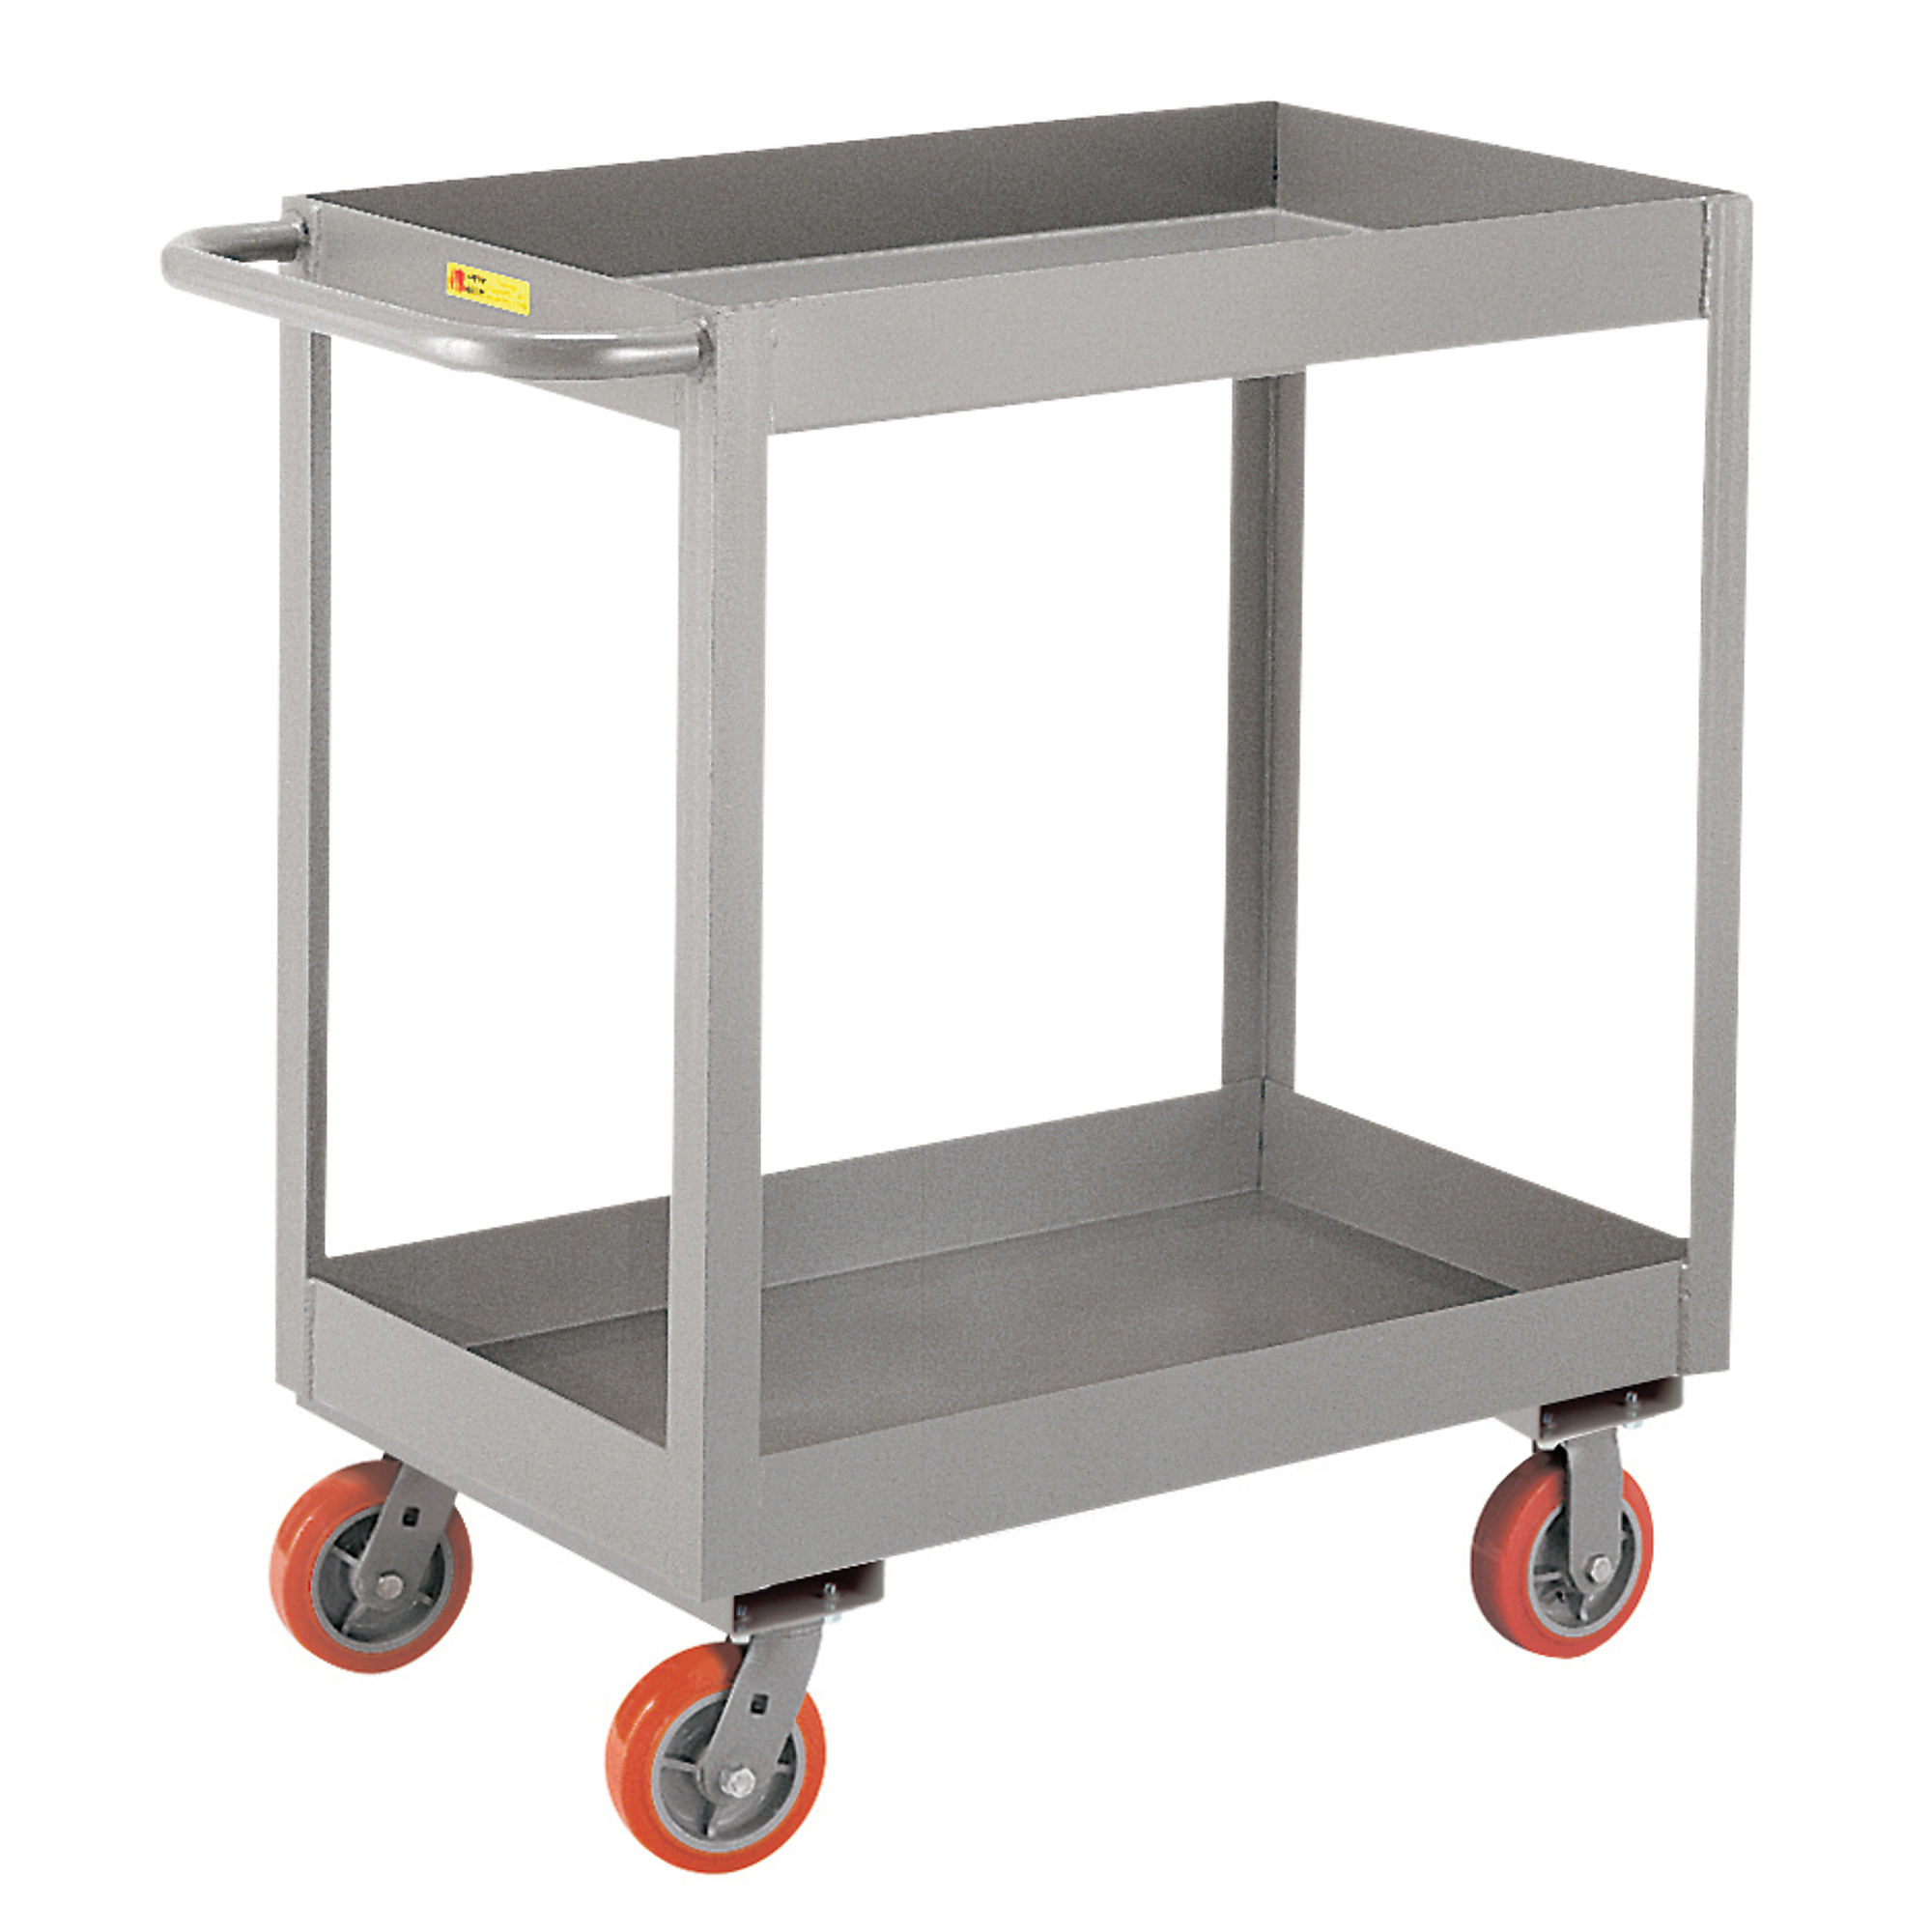 Little Giant, 3Inch Deep Shelf Truck, 18x30, 3600 lbs, Total Capacity 3600 lb, Shelves (qty.) 2, Material Carbon Steel, Model DS1830X3-6PY